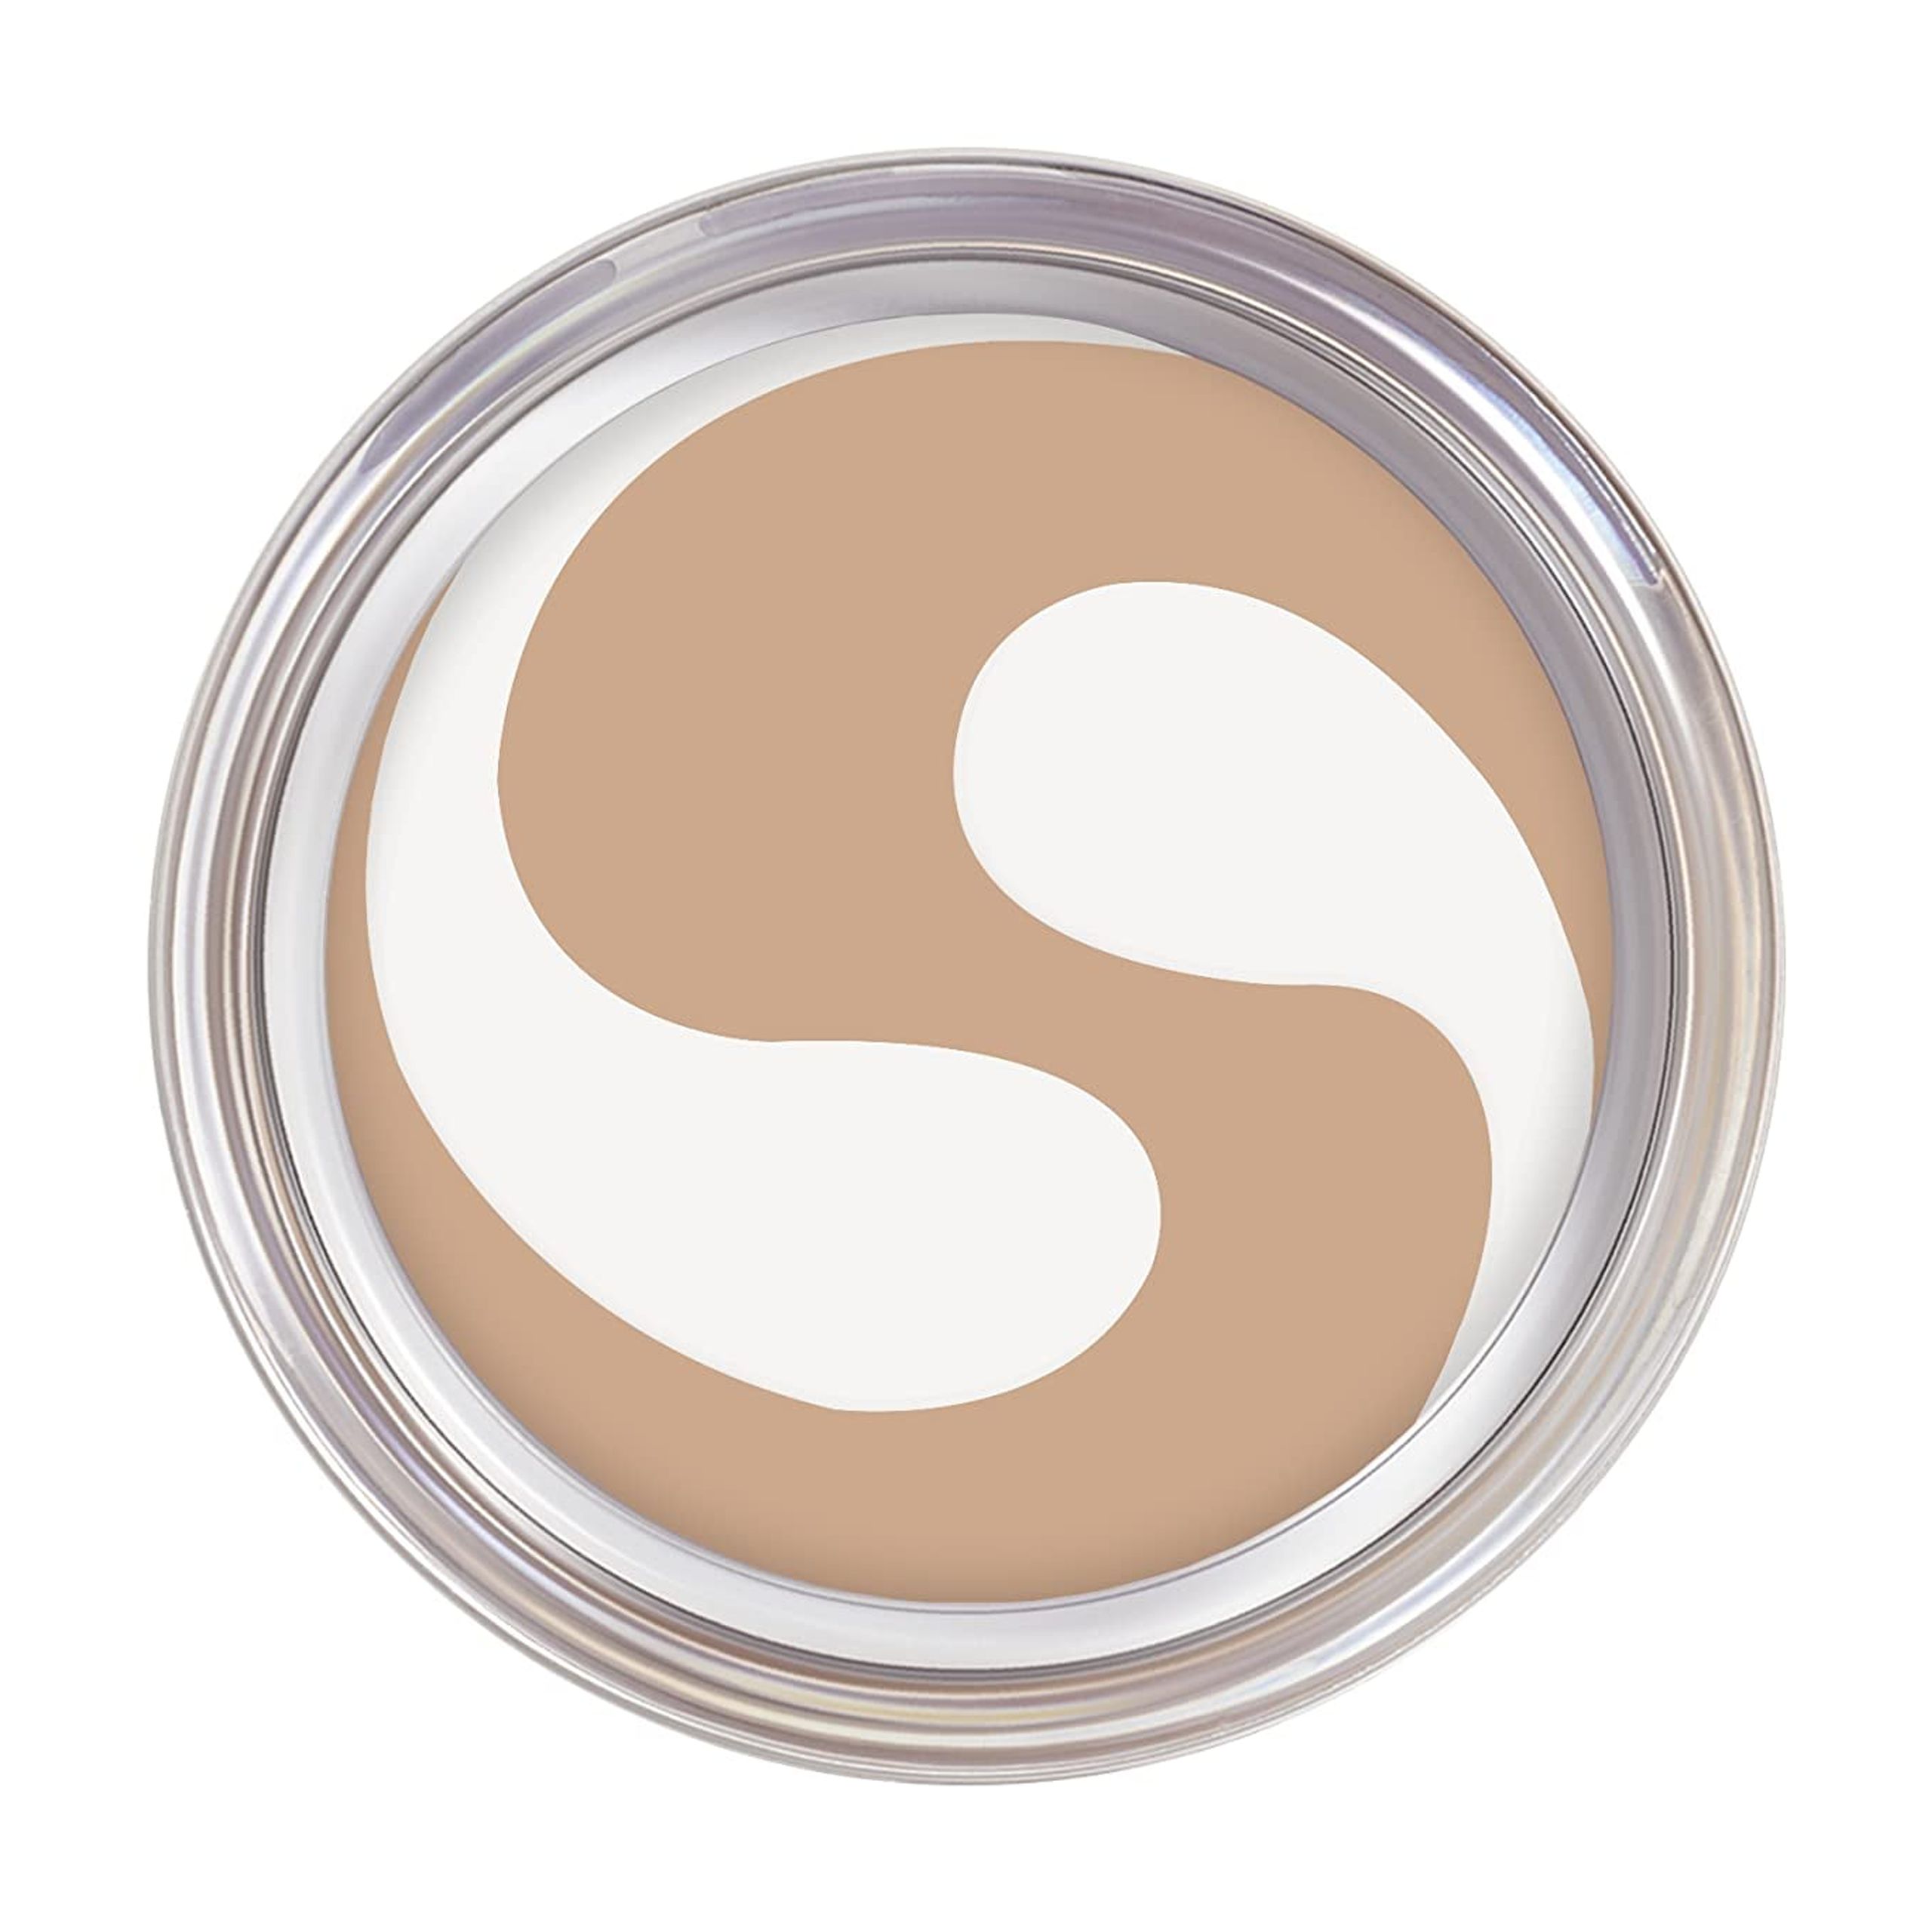 COVERGIRL + OLAY Simply Ageless Instant Wrinkle-Defying Foundation with SPF 28, Natural Beige, 0.44 oz - image 3 of 5